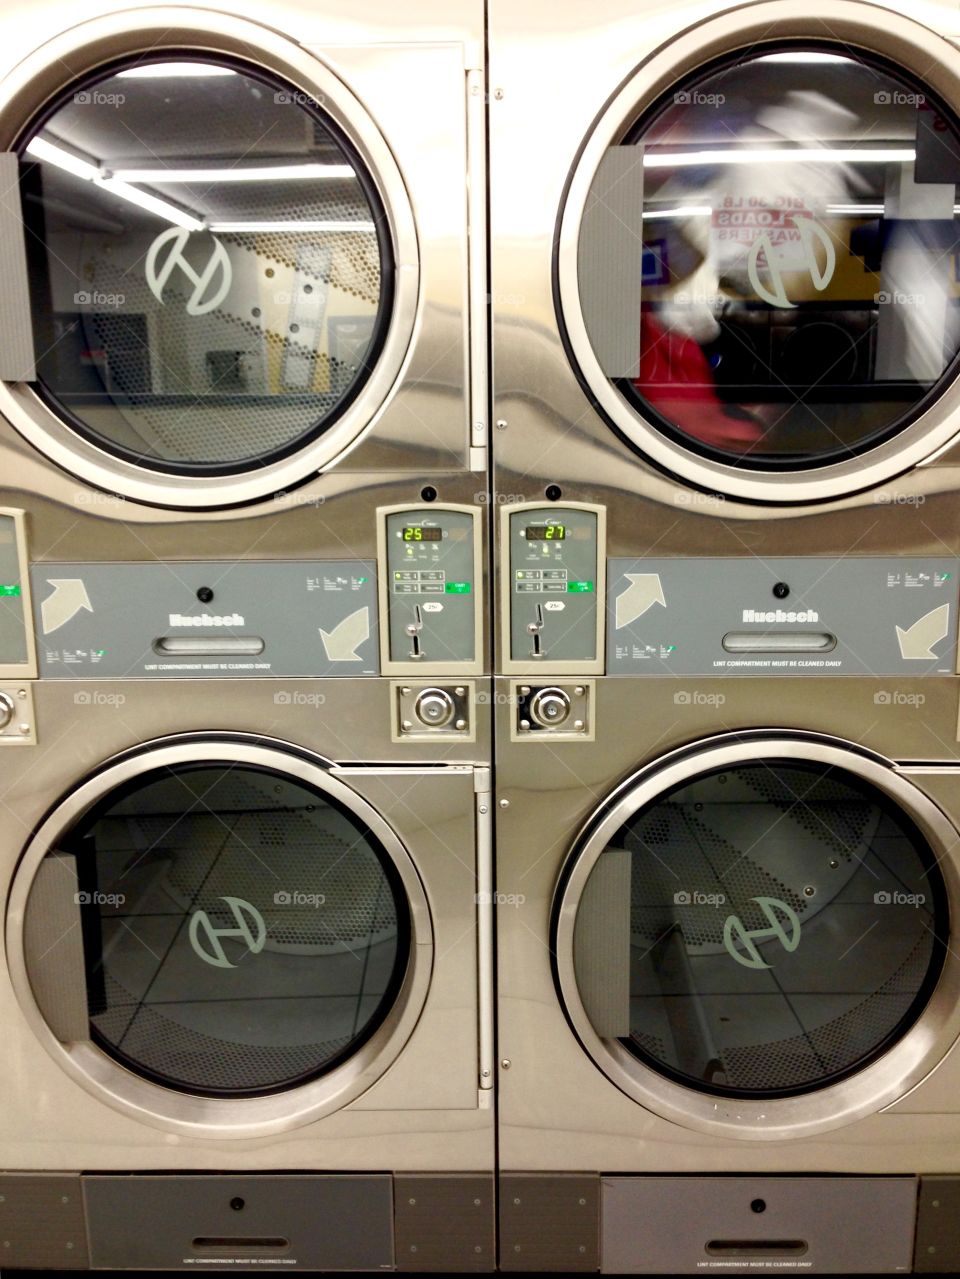 Saturday Night At The Laundromat 


Published by:
HappyBrownMonkey 